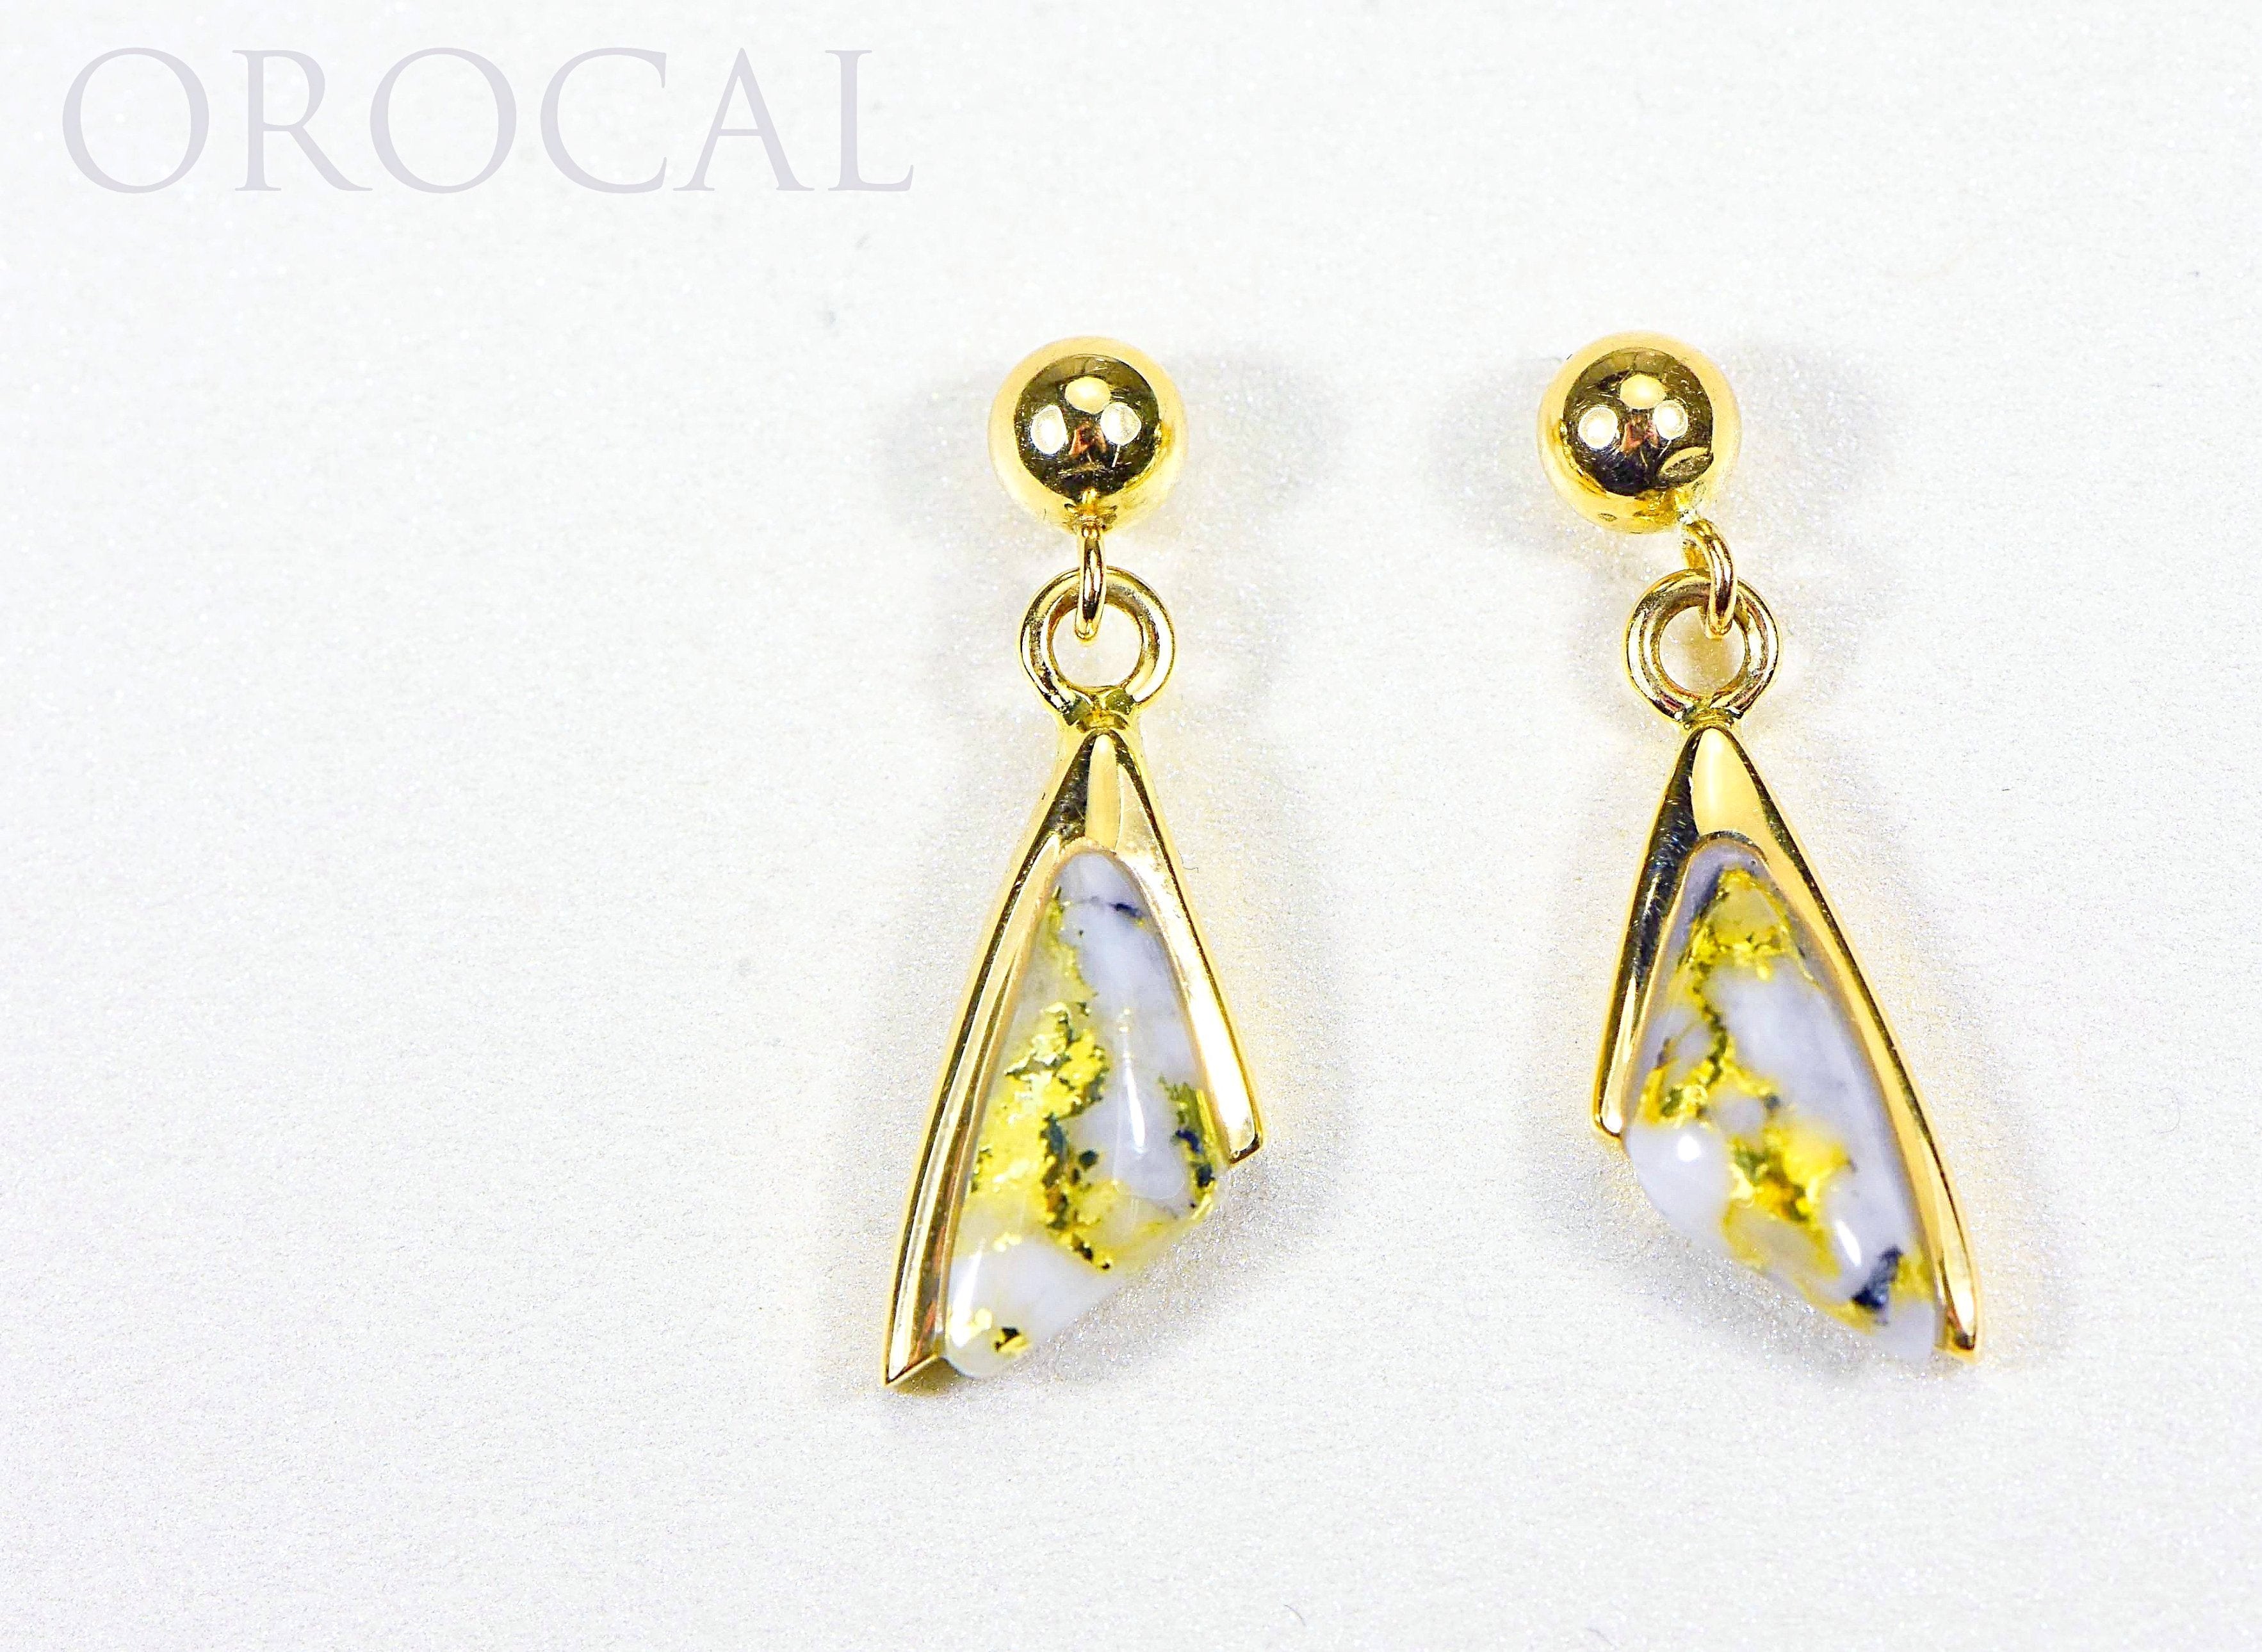 Gold Quartz Earrings "Orocal" EDL25SQ/PD Genuine Hand Crafted Jewelry - 14K Gold Casting